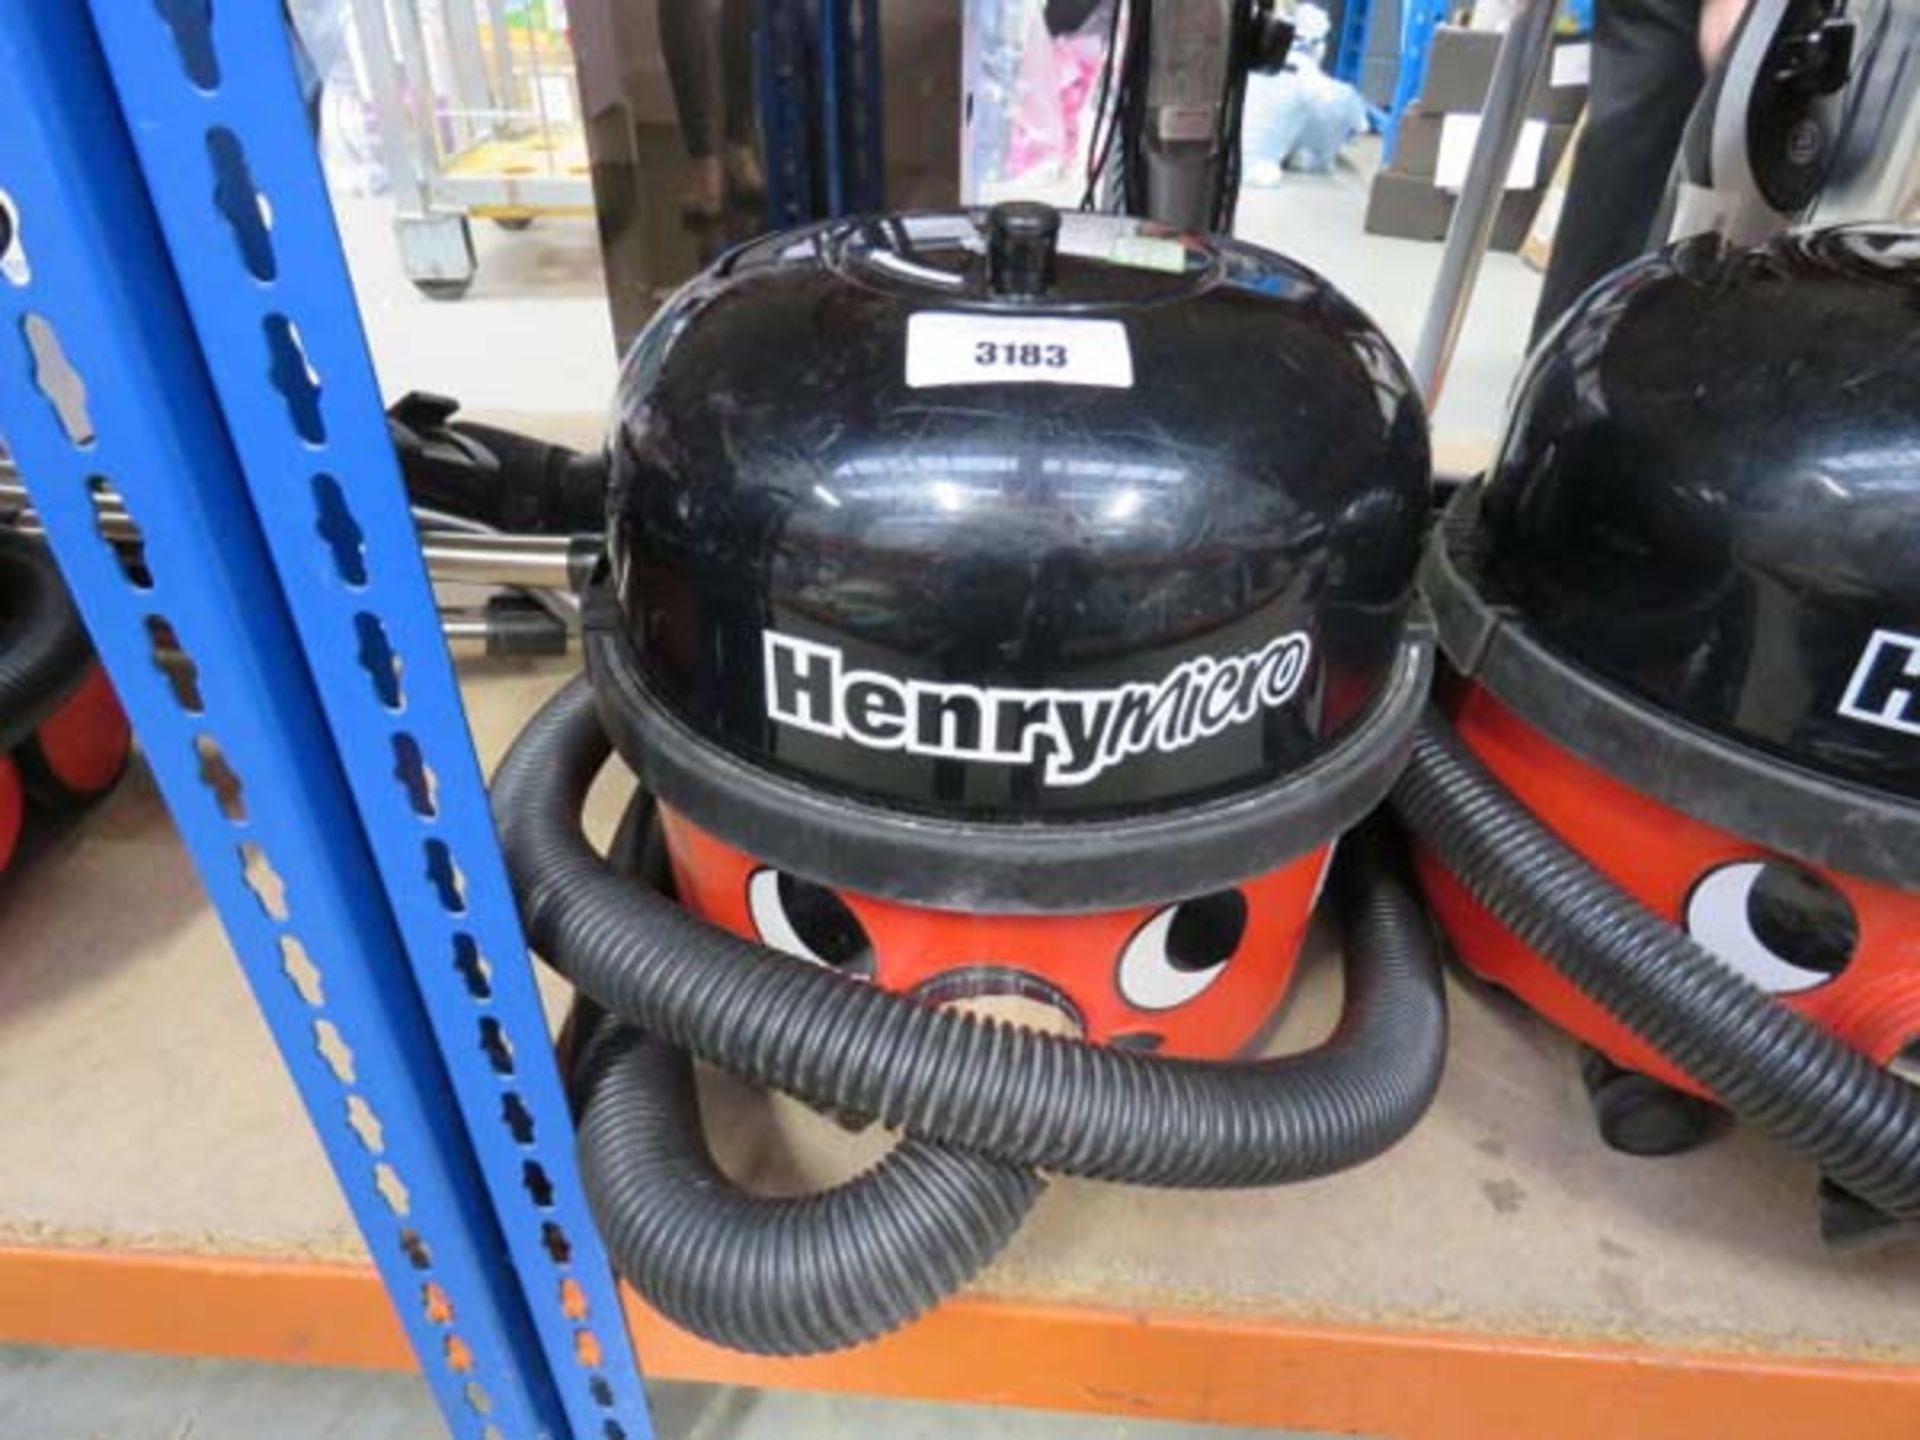 (9) Henry micro vacuum cleaner with pole